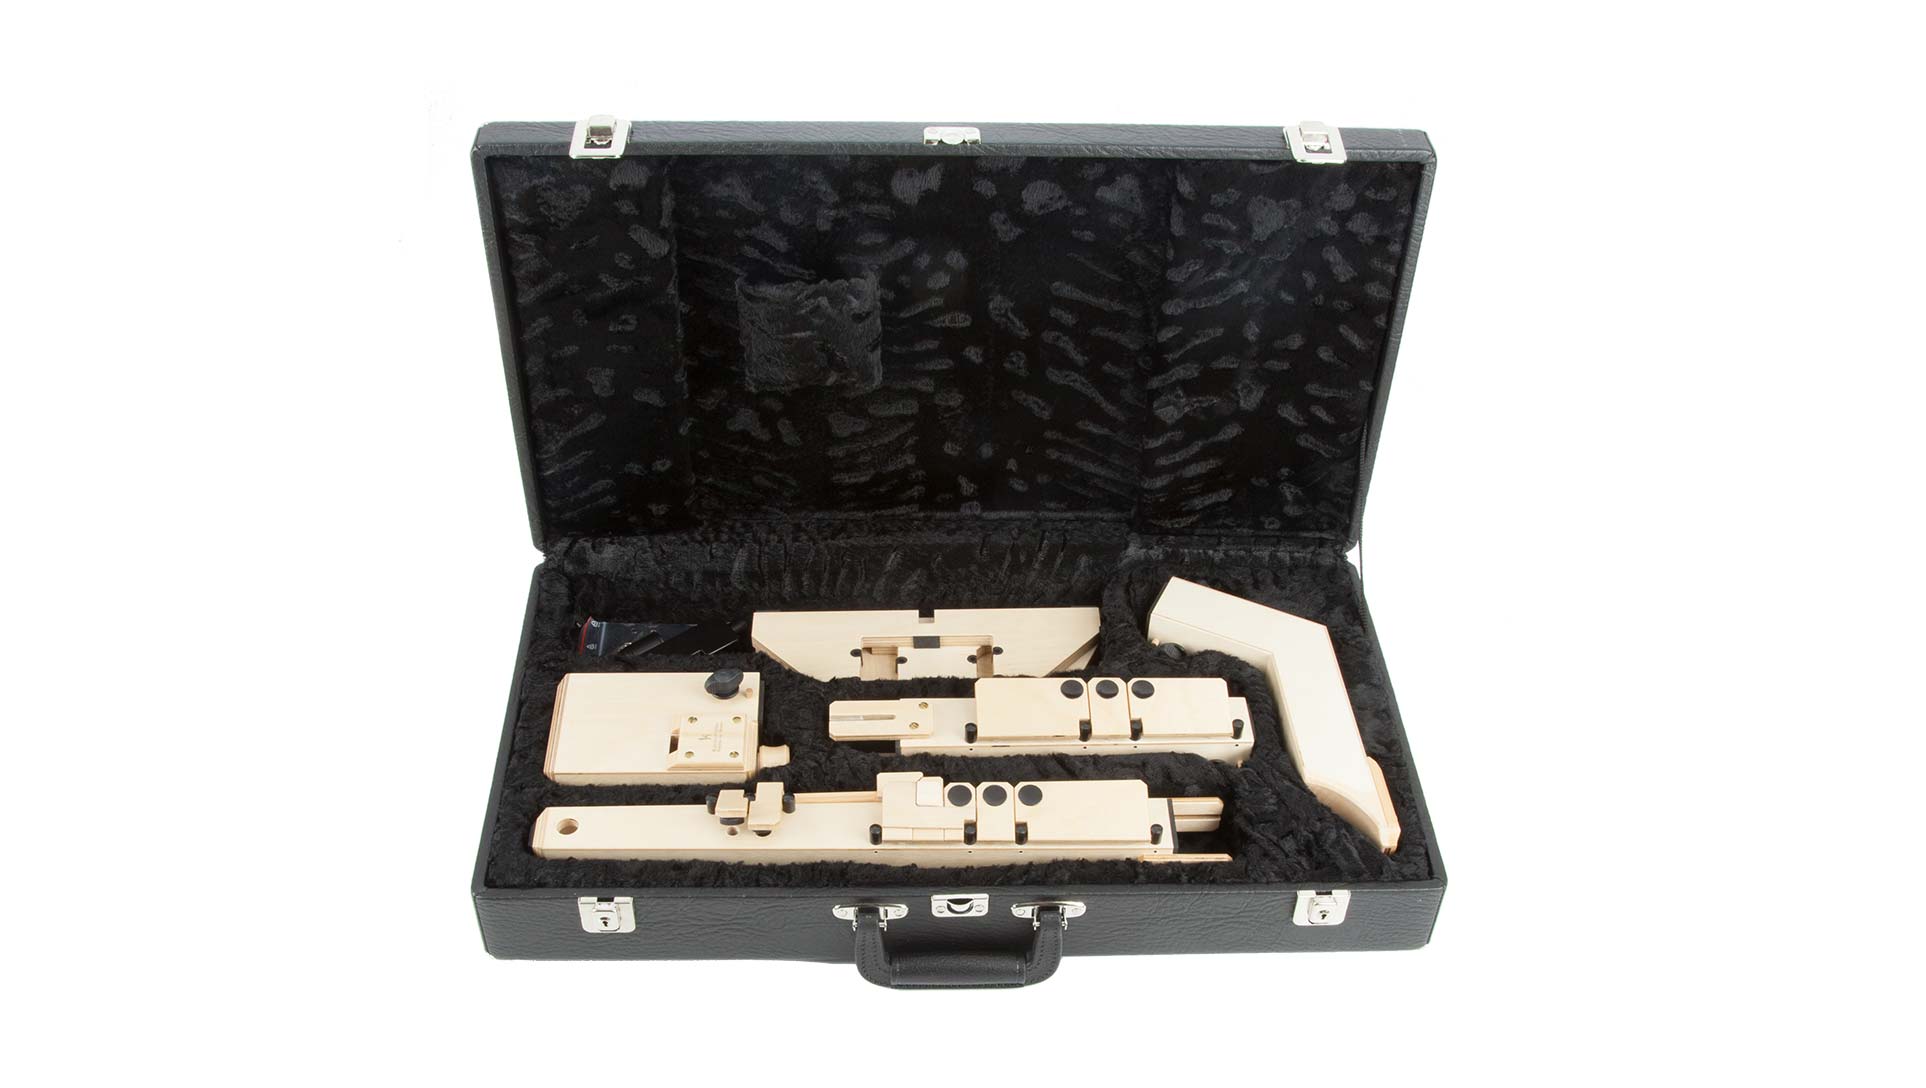 Paetzold by Kunath, basset recorder in f, "Master", "HP Original", 442 Hz, solid cherry wood